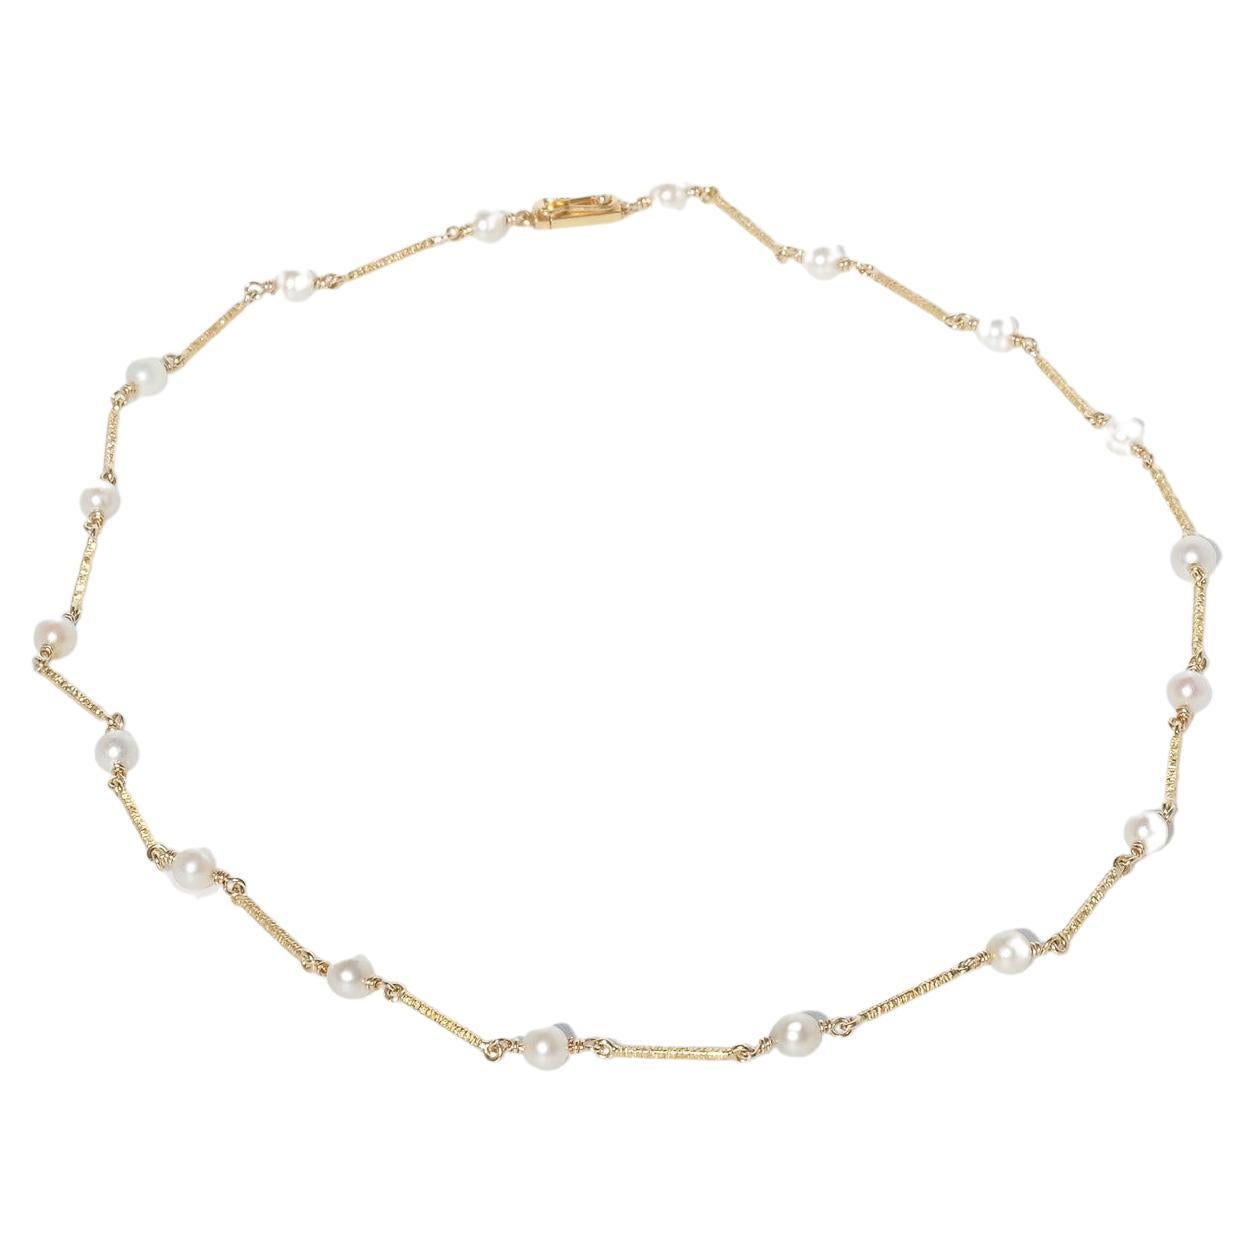 Vintage 14k Gold and Pearl Necklace Made Year 1968 by Konstantin Buchert